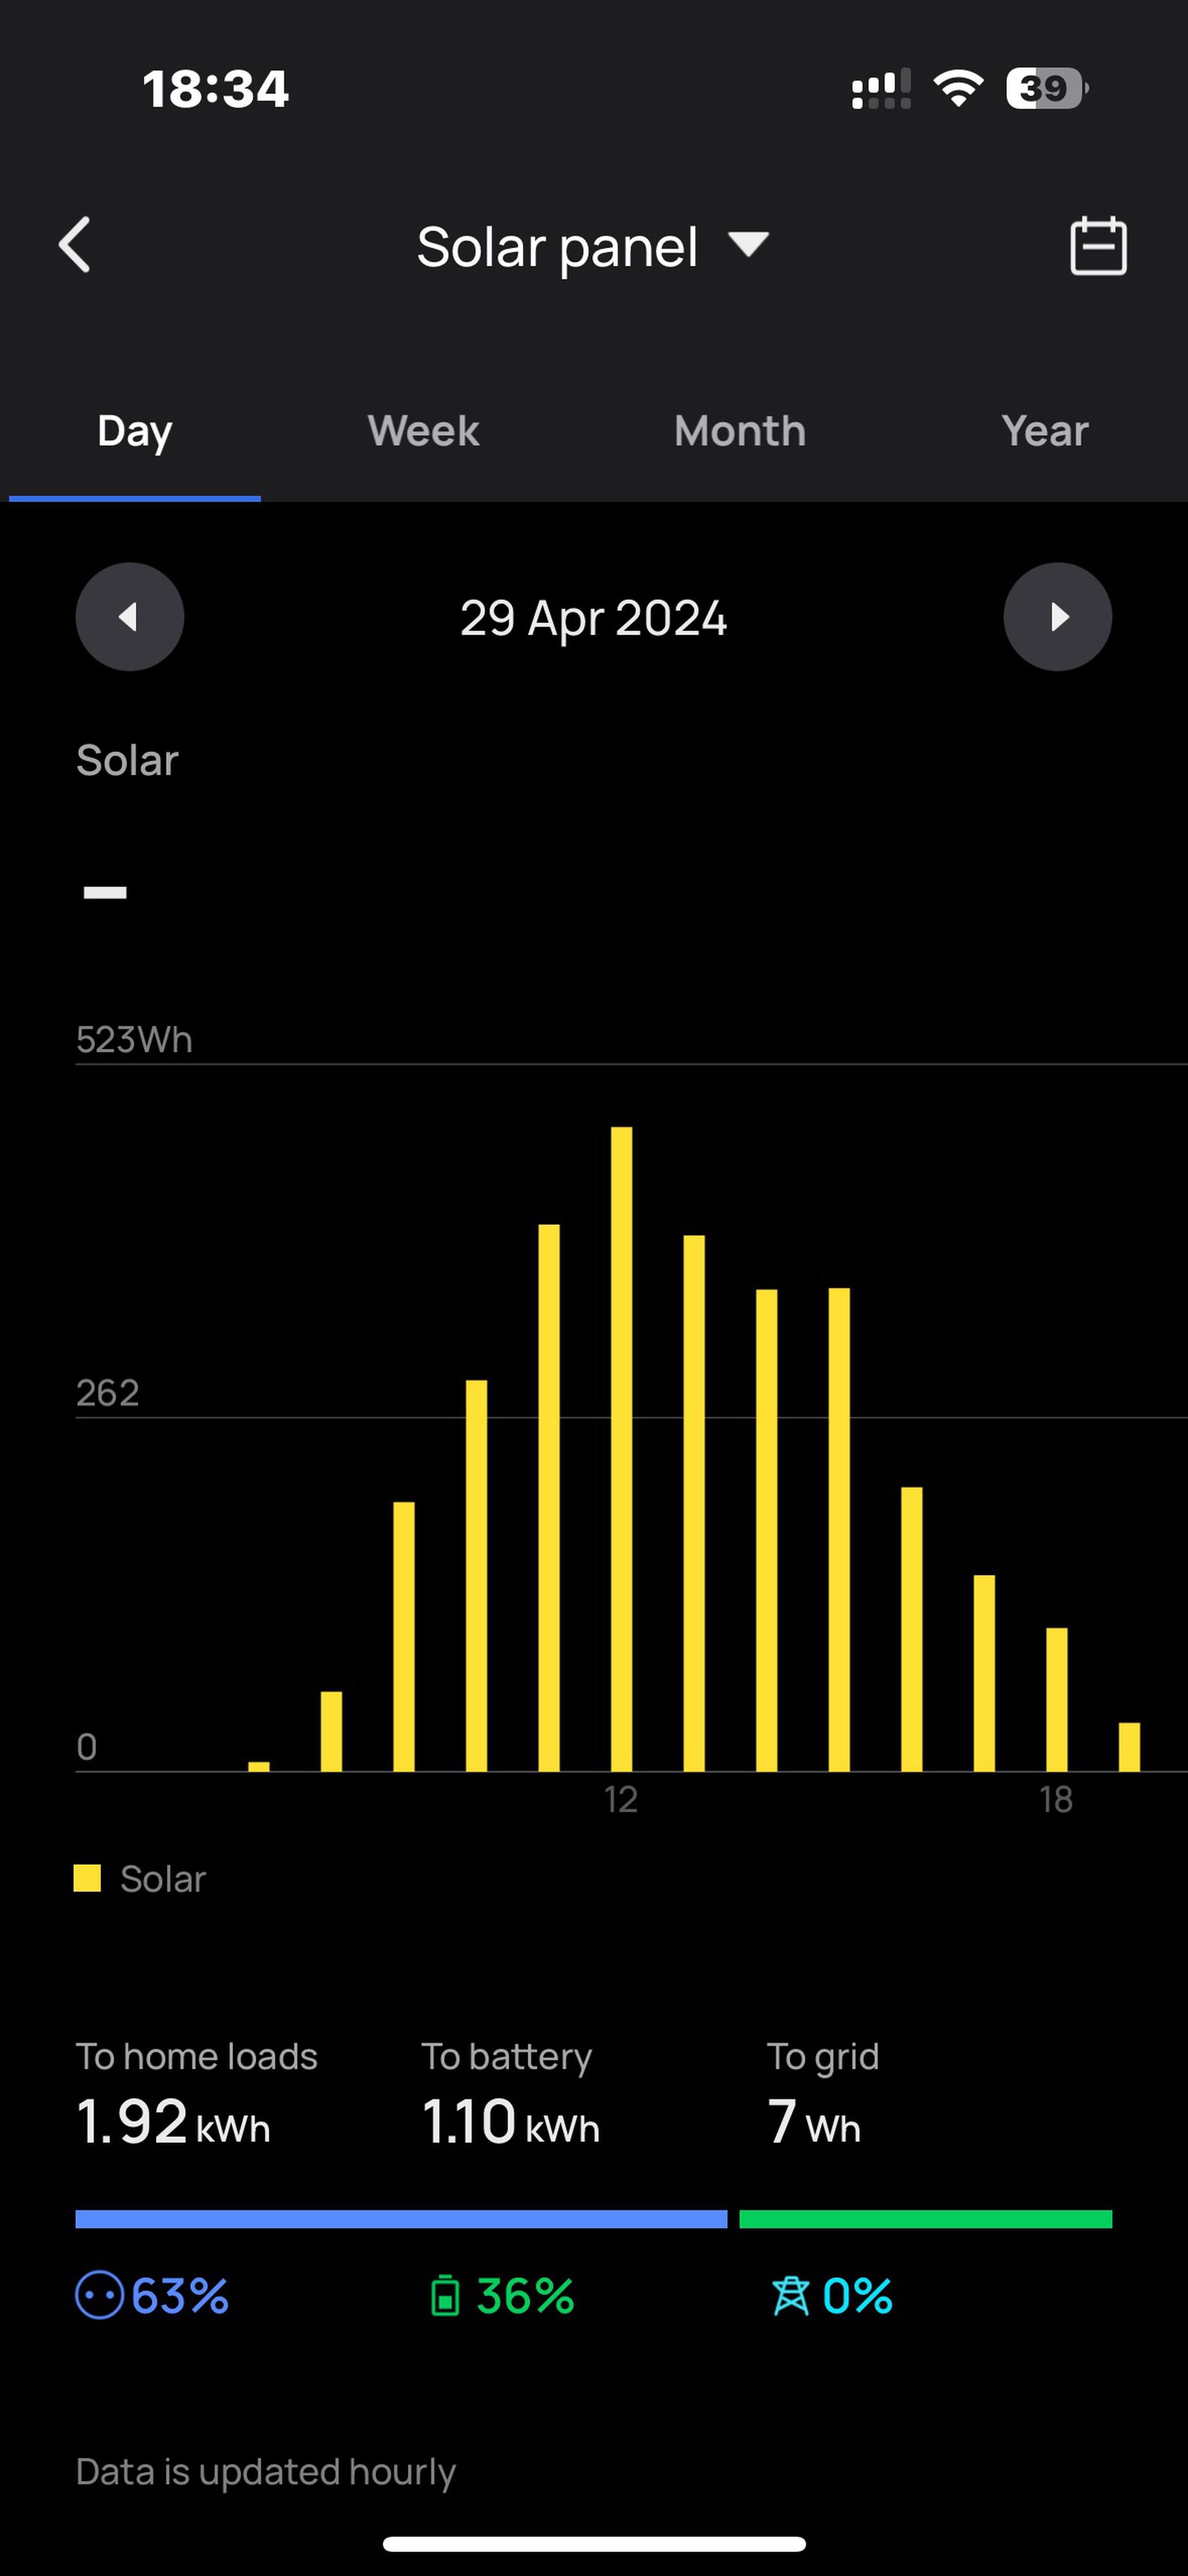 Solar power from the PowerStream on April 29th. Note production peaking between 11AM and 3PM.